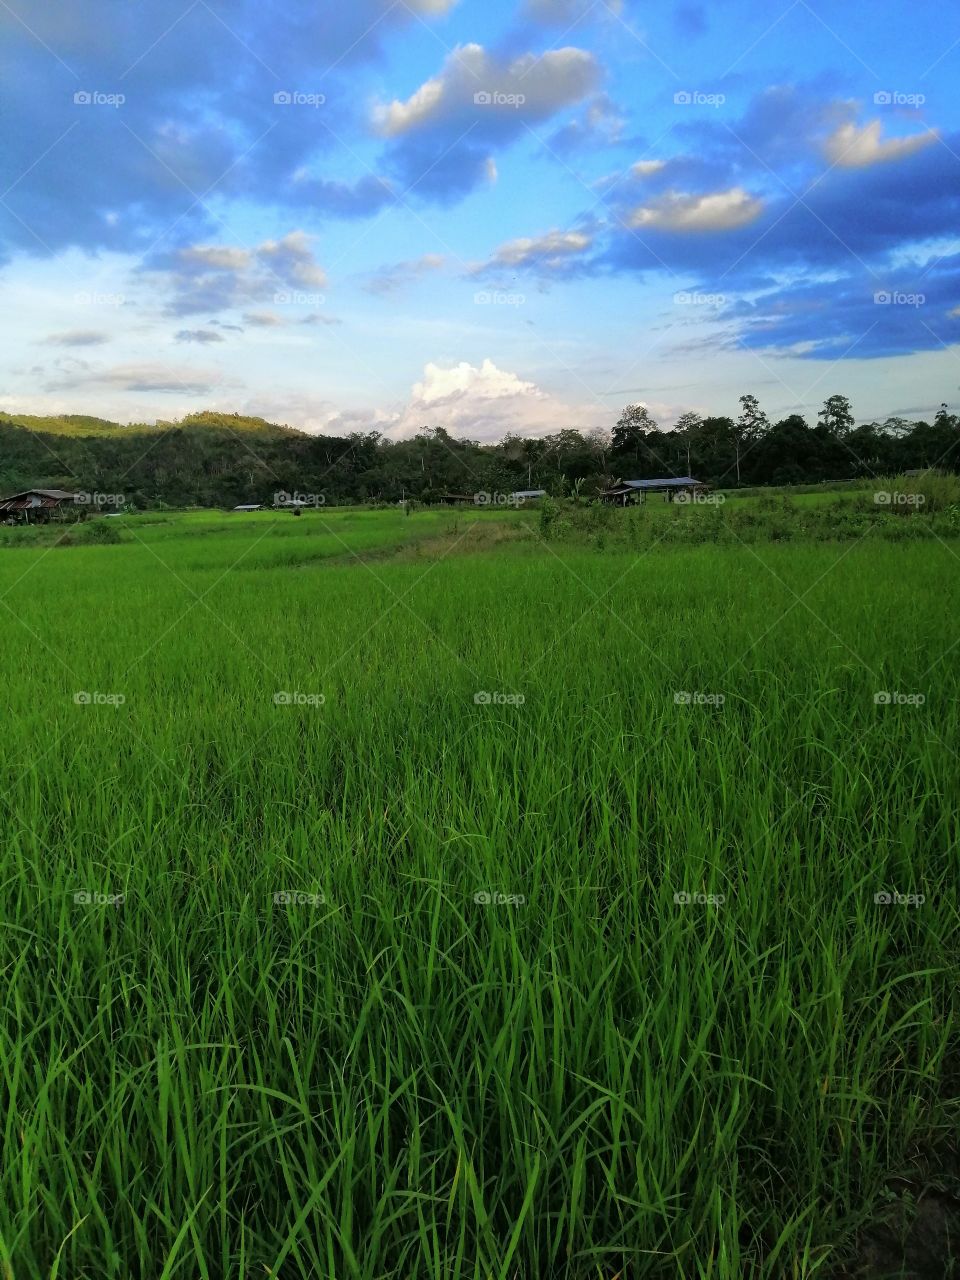 Paddy field in our kampung.